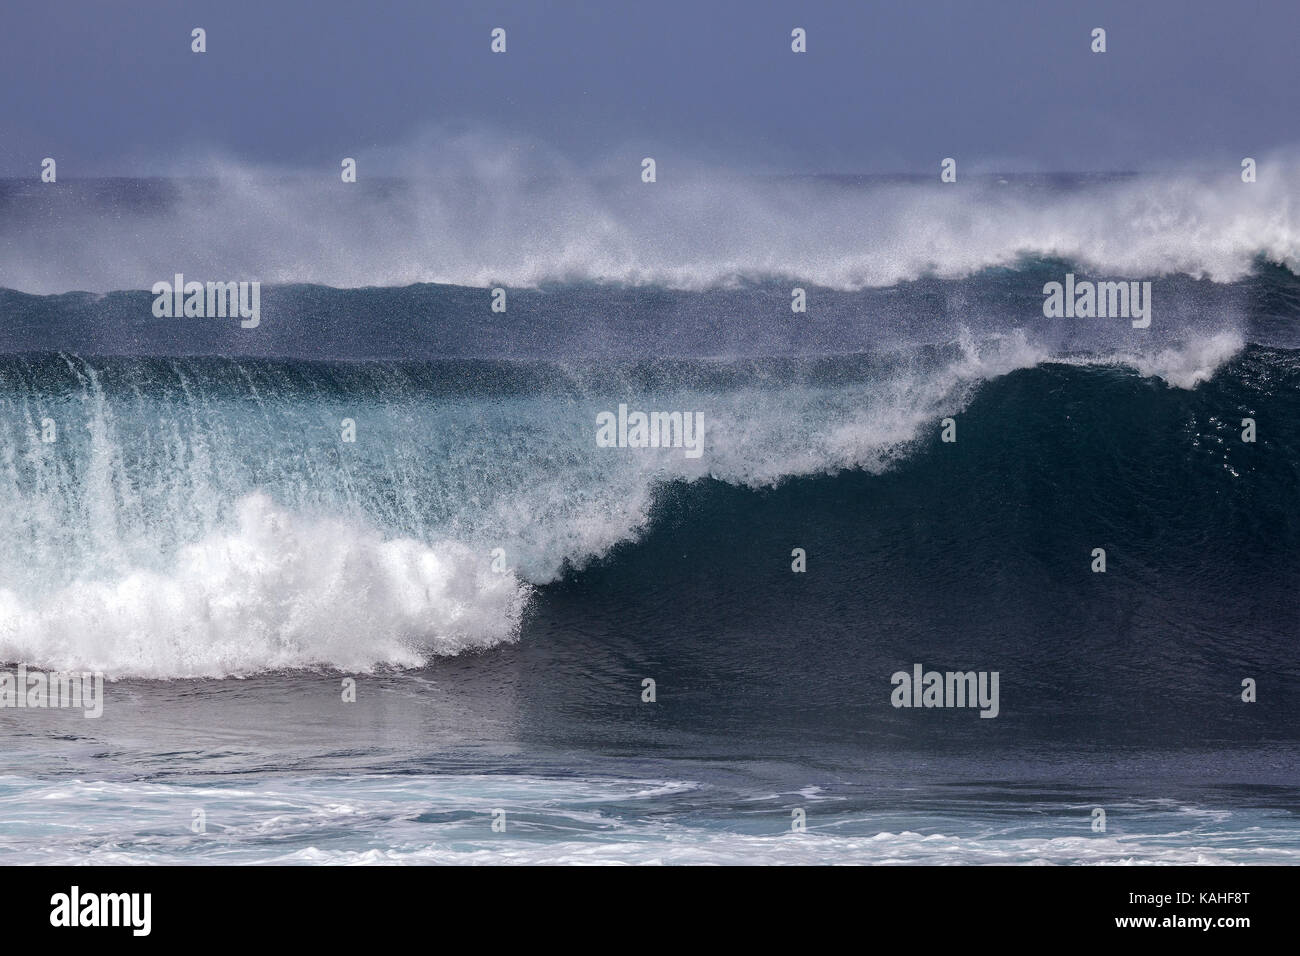 Breaking waves, strong swell, spray, island of Faial, Azores, Portugal Stock Photo